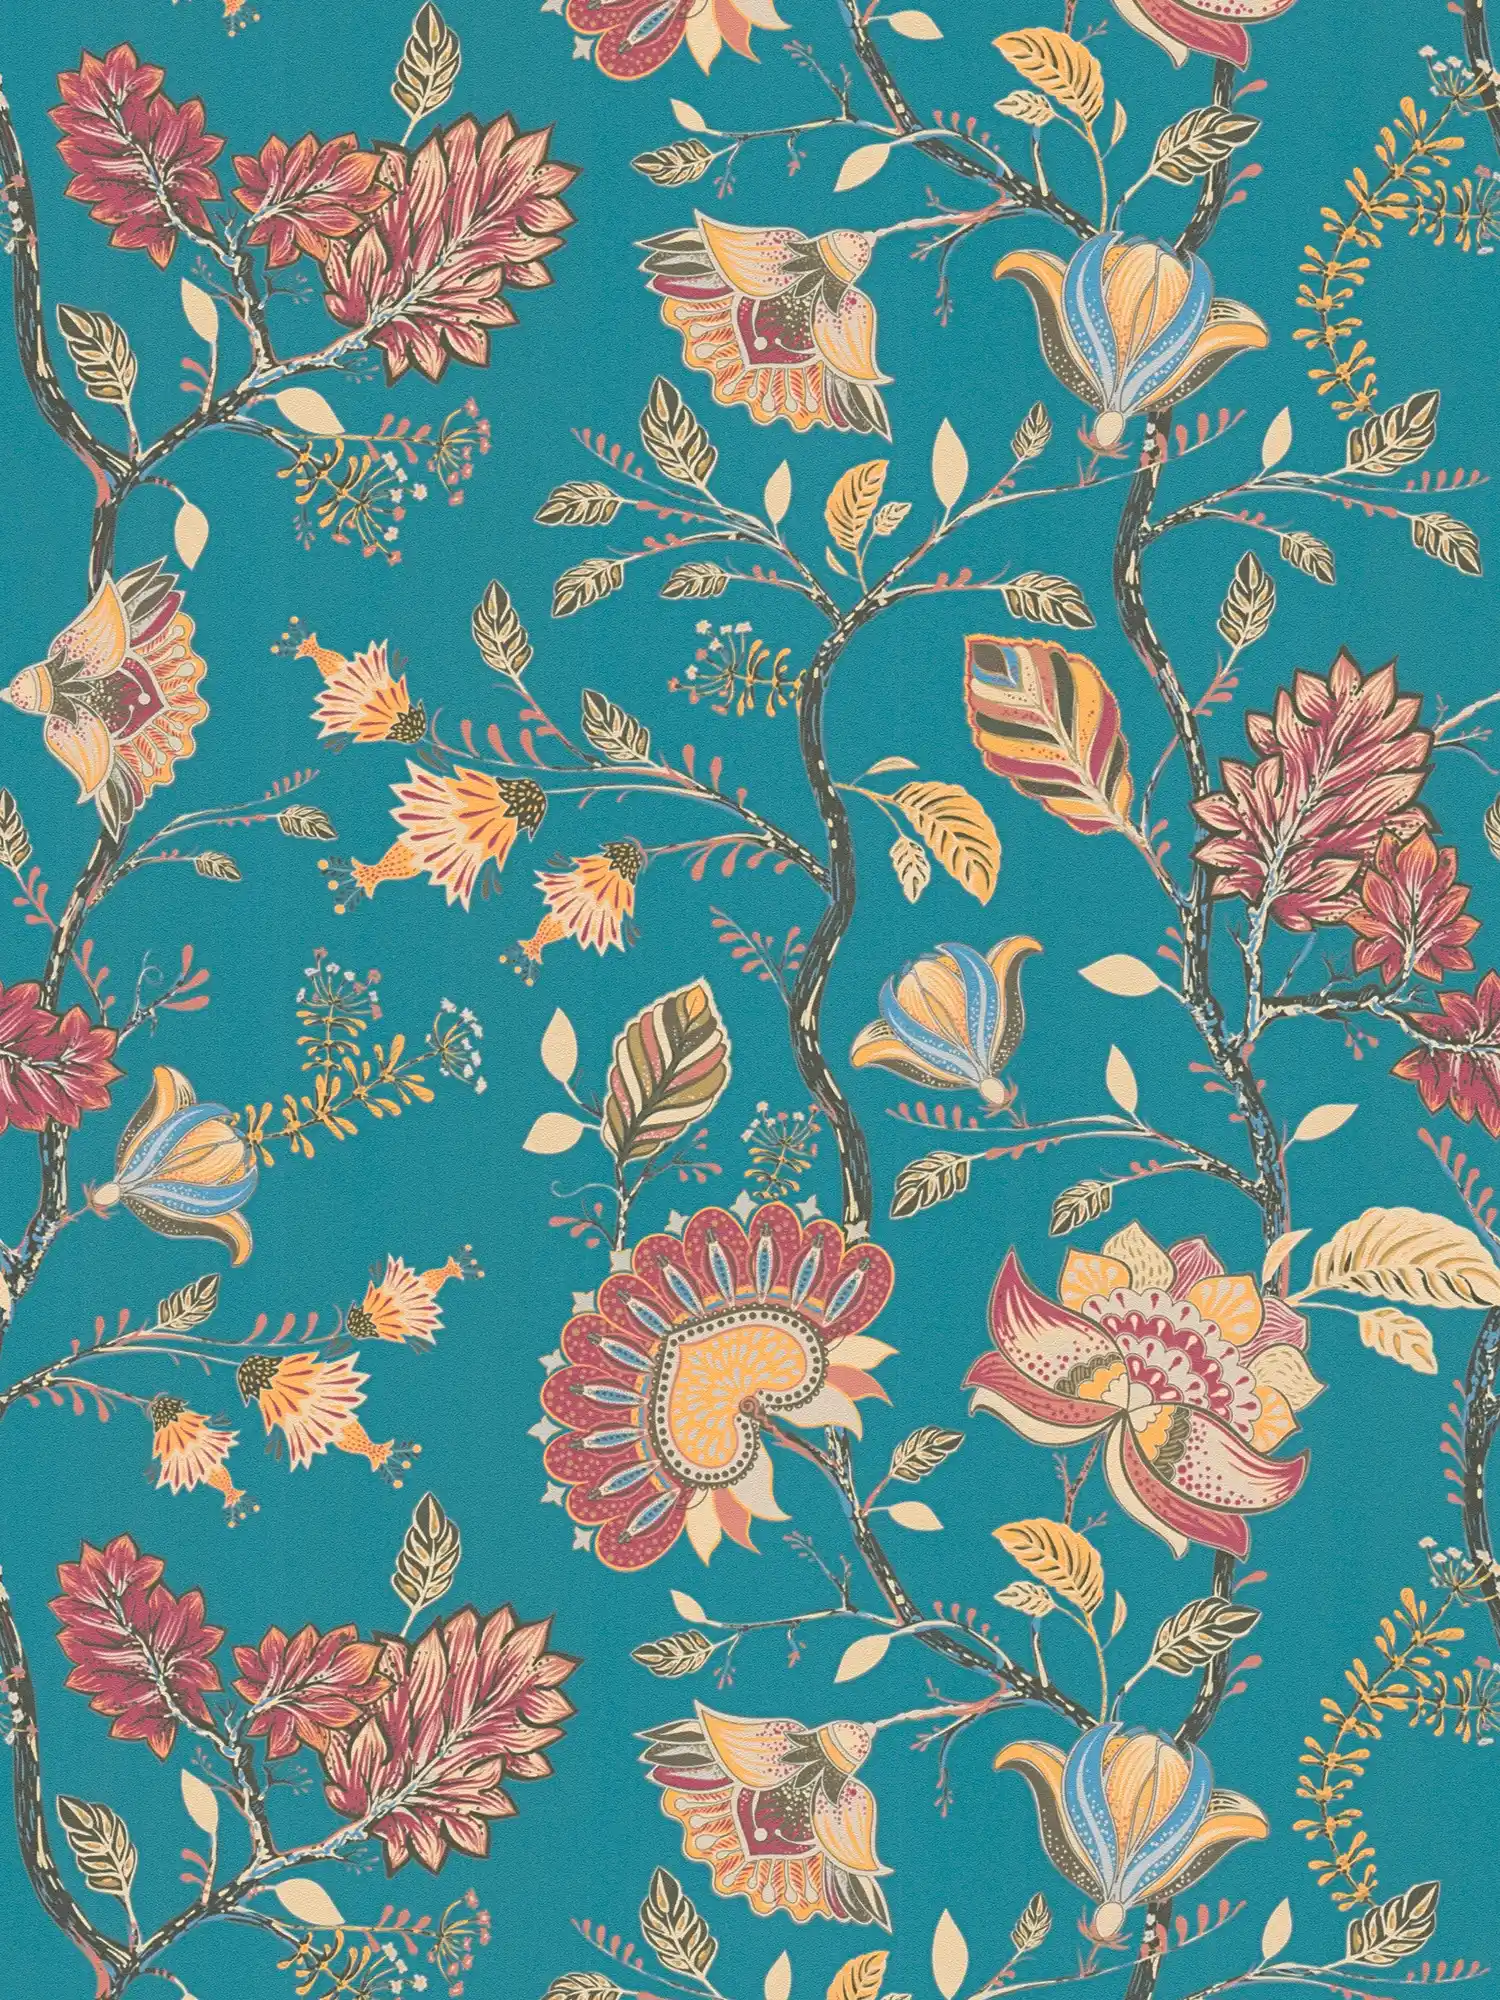 Non-woven wallpaper with floral colourful pattern - blue, yellow, red
